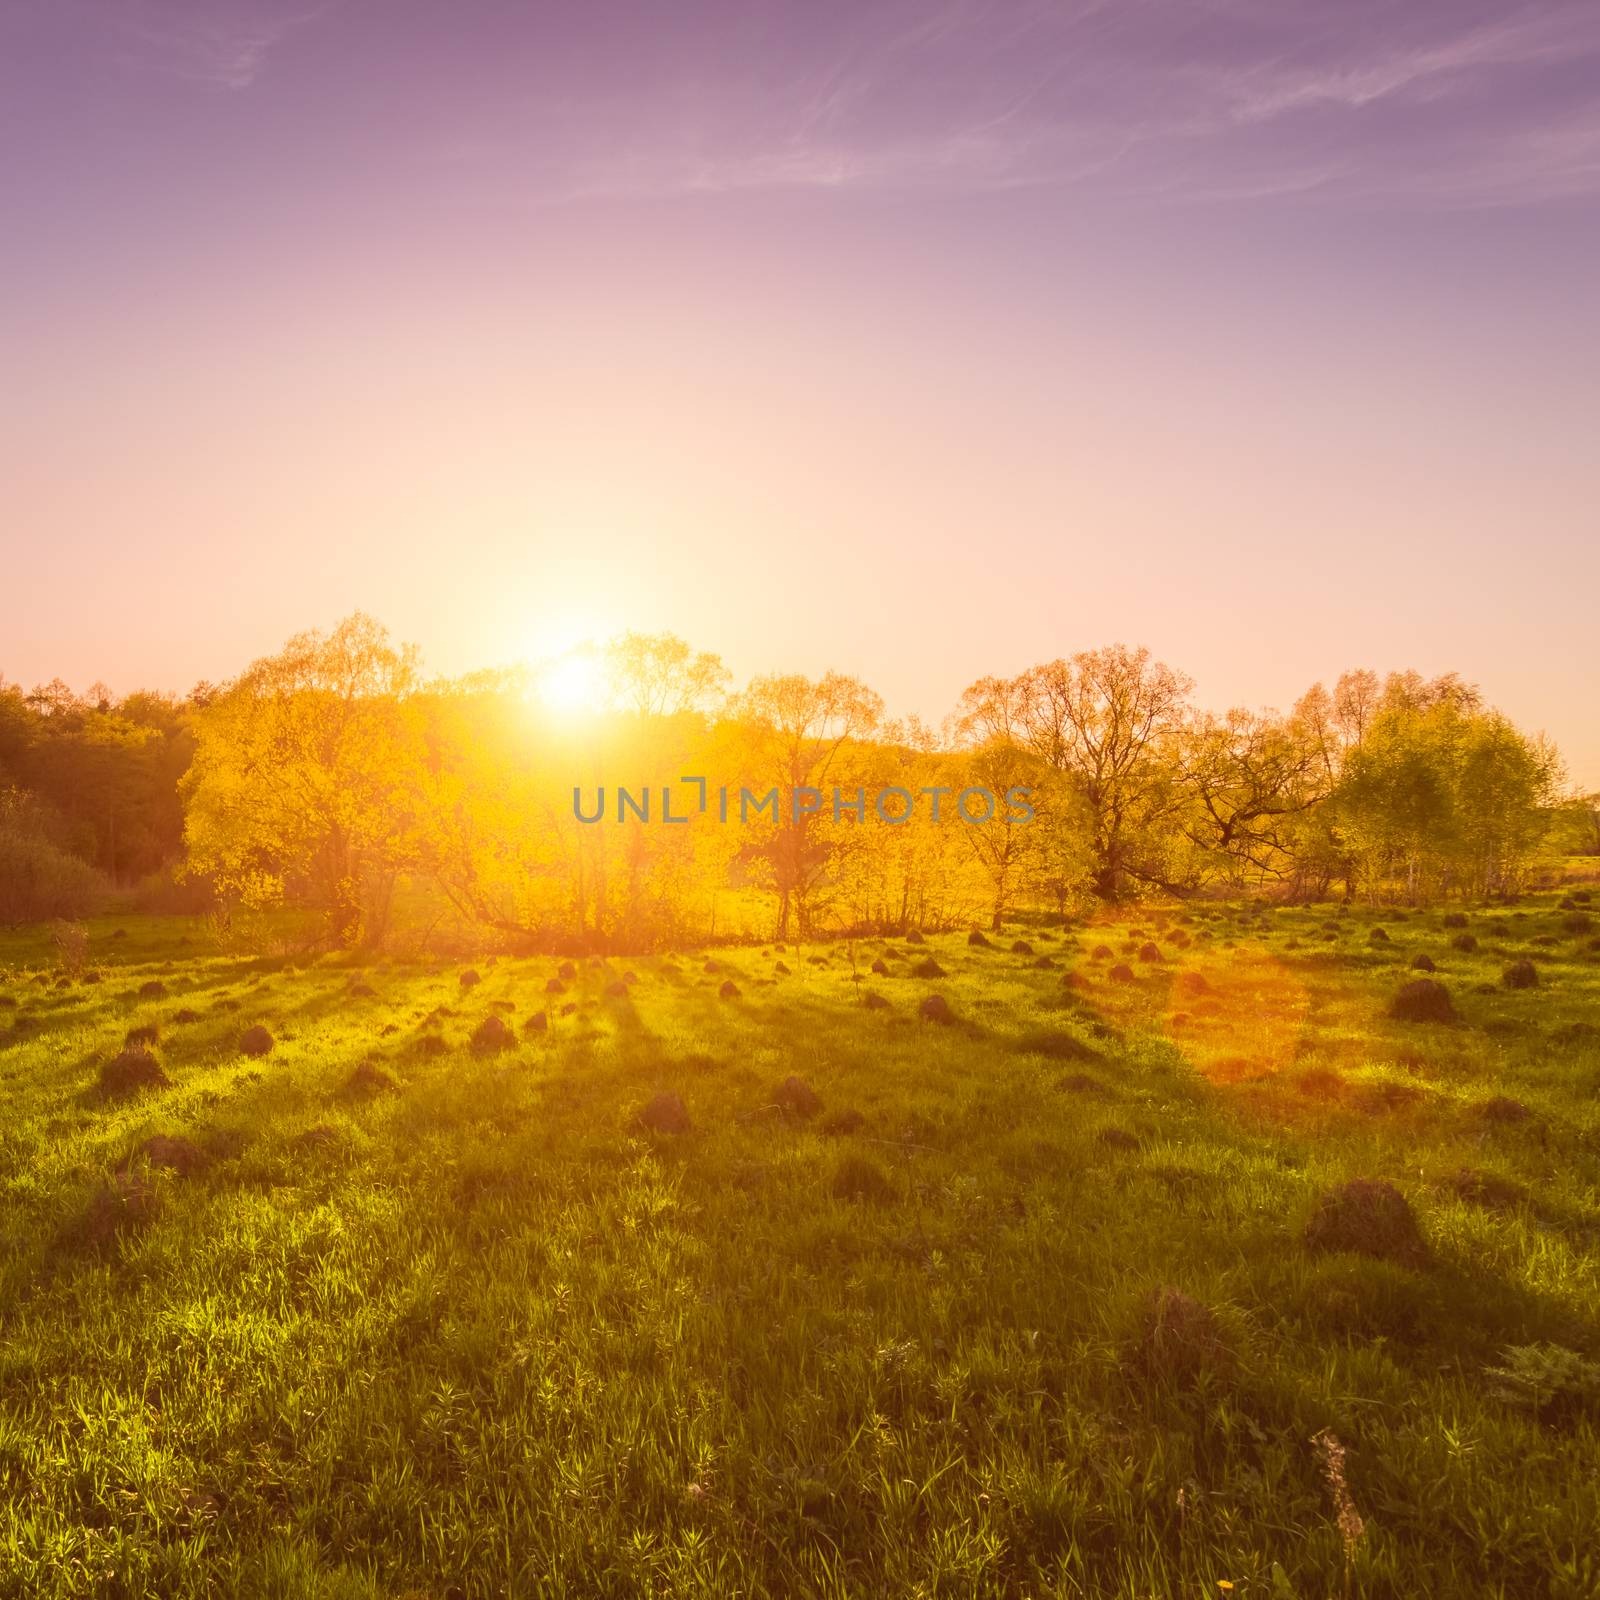 Sunset or dawn in a spring field with green grass, a path with tire marks, willows and a clear sky. The sun leaving deep shadows.